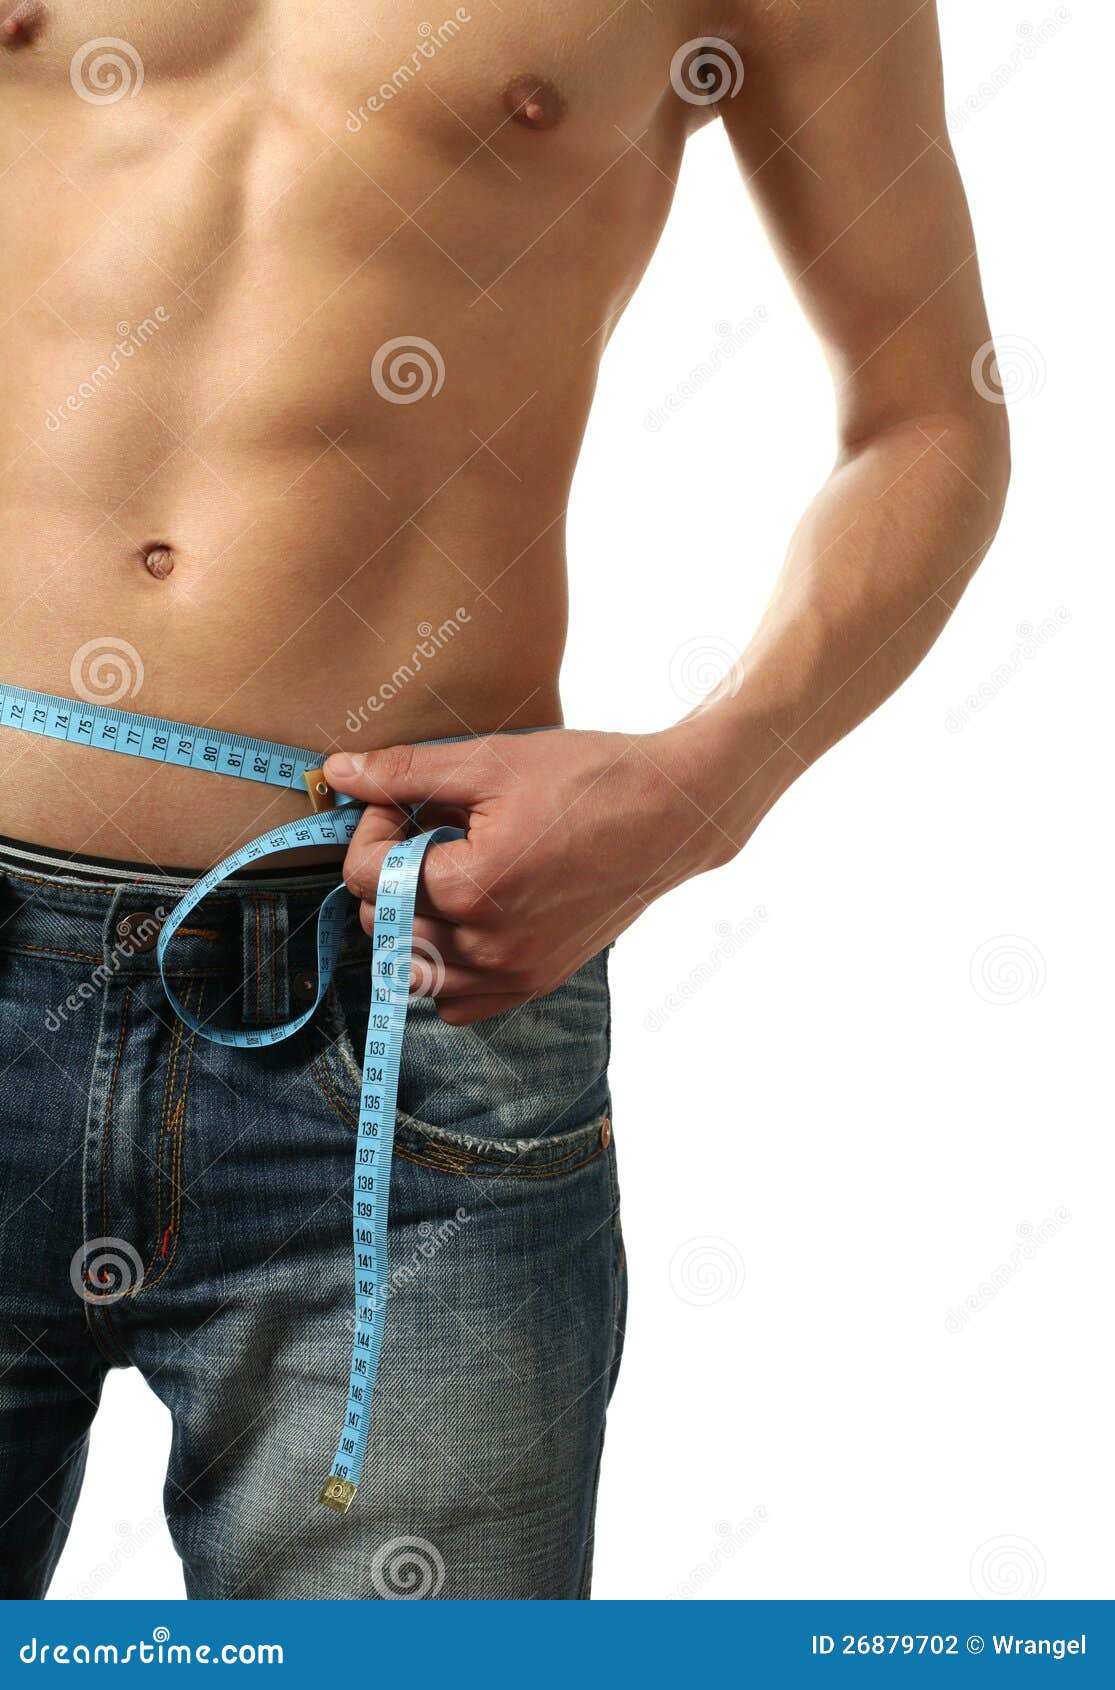 Man measuring his waist with a tape measure 2246454 Stock Photo at